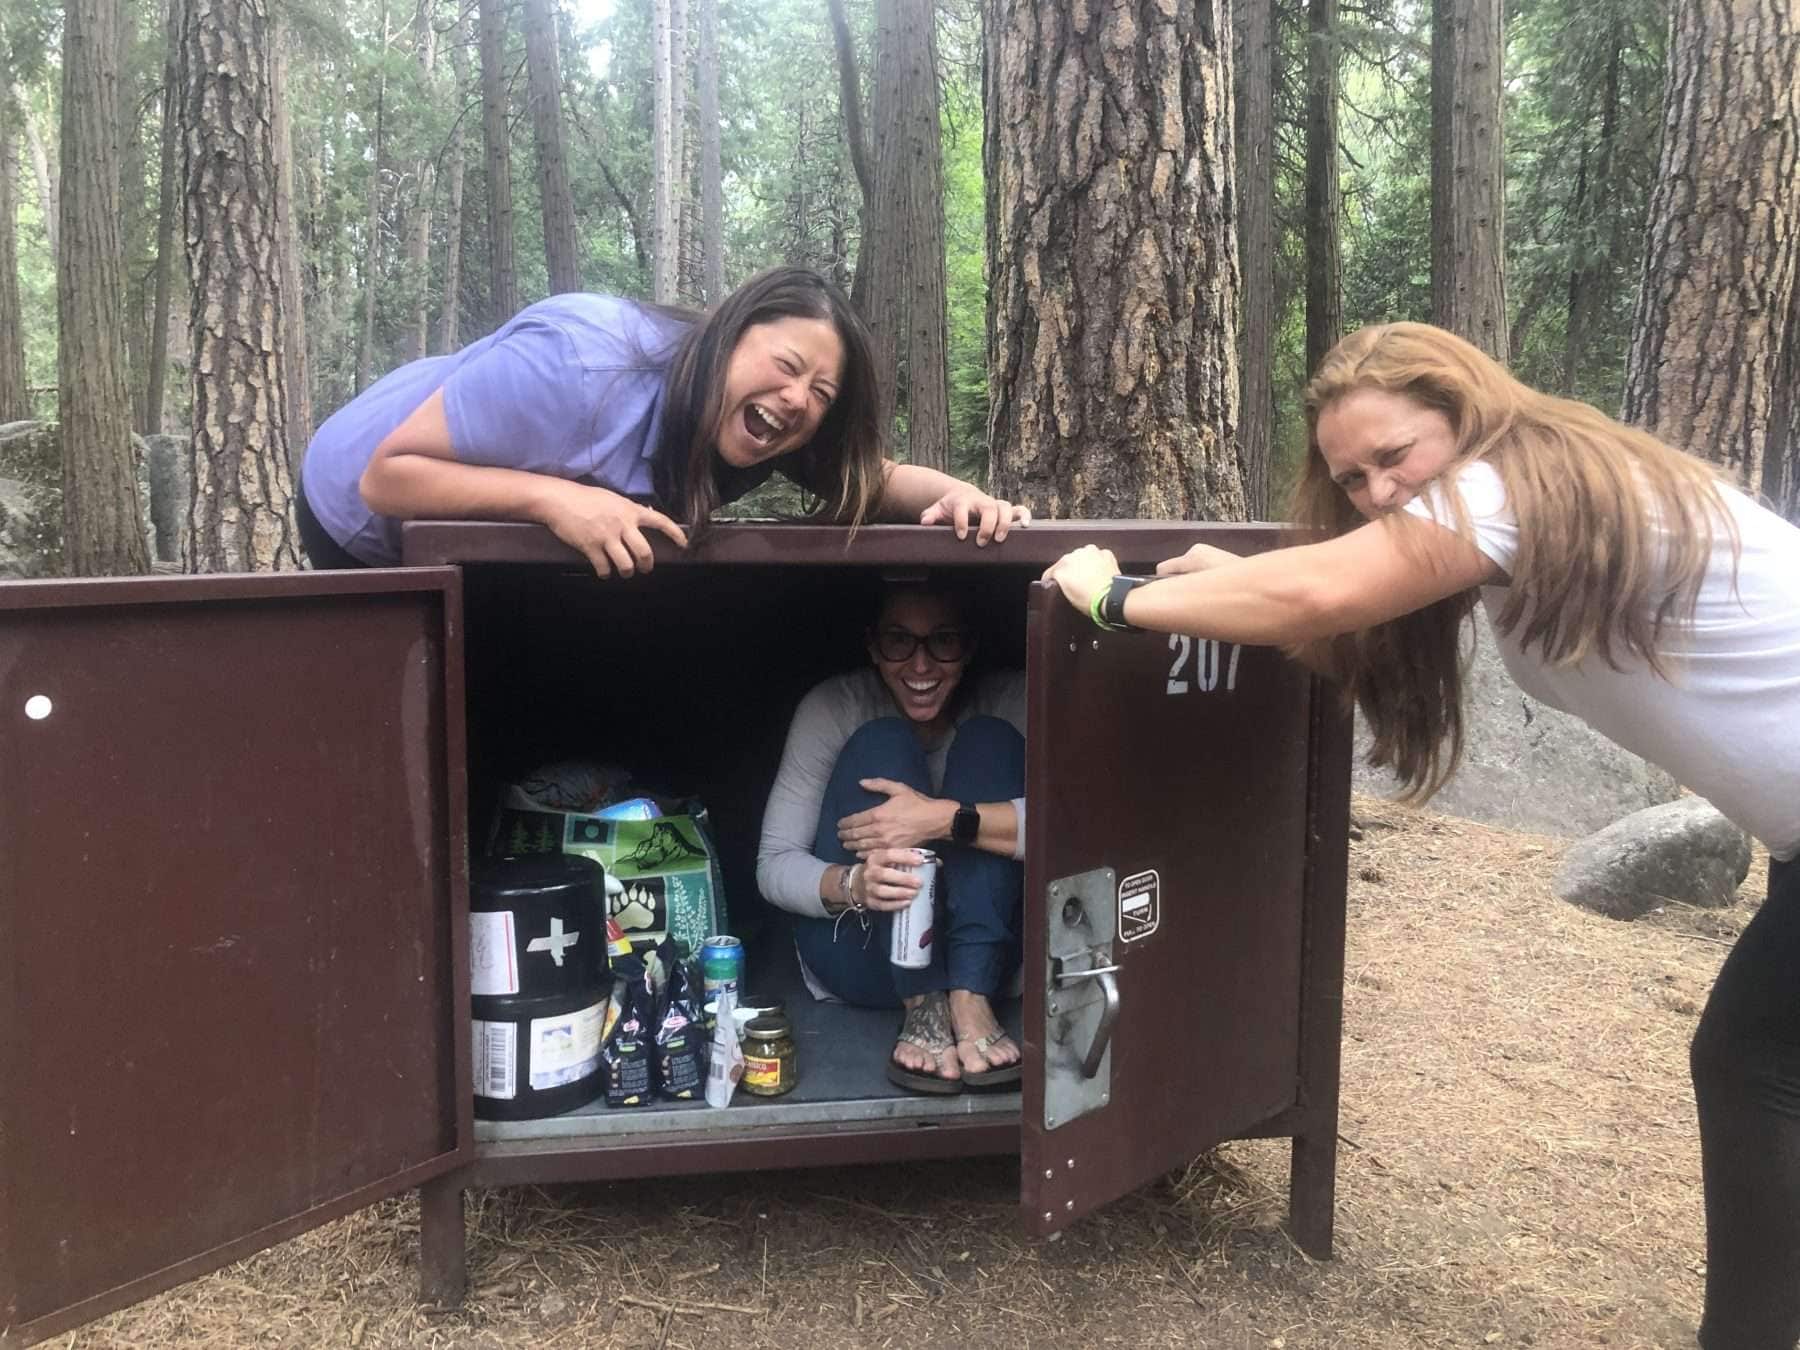 Women opening a cabinet and laughing during a camping trip in Yosemite National Park